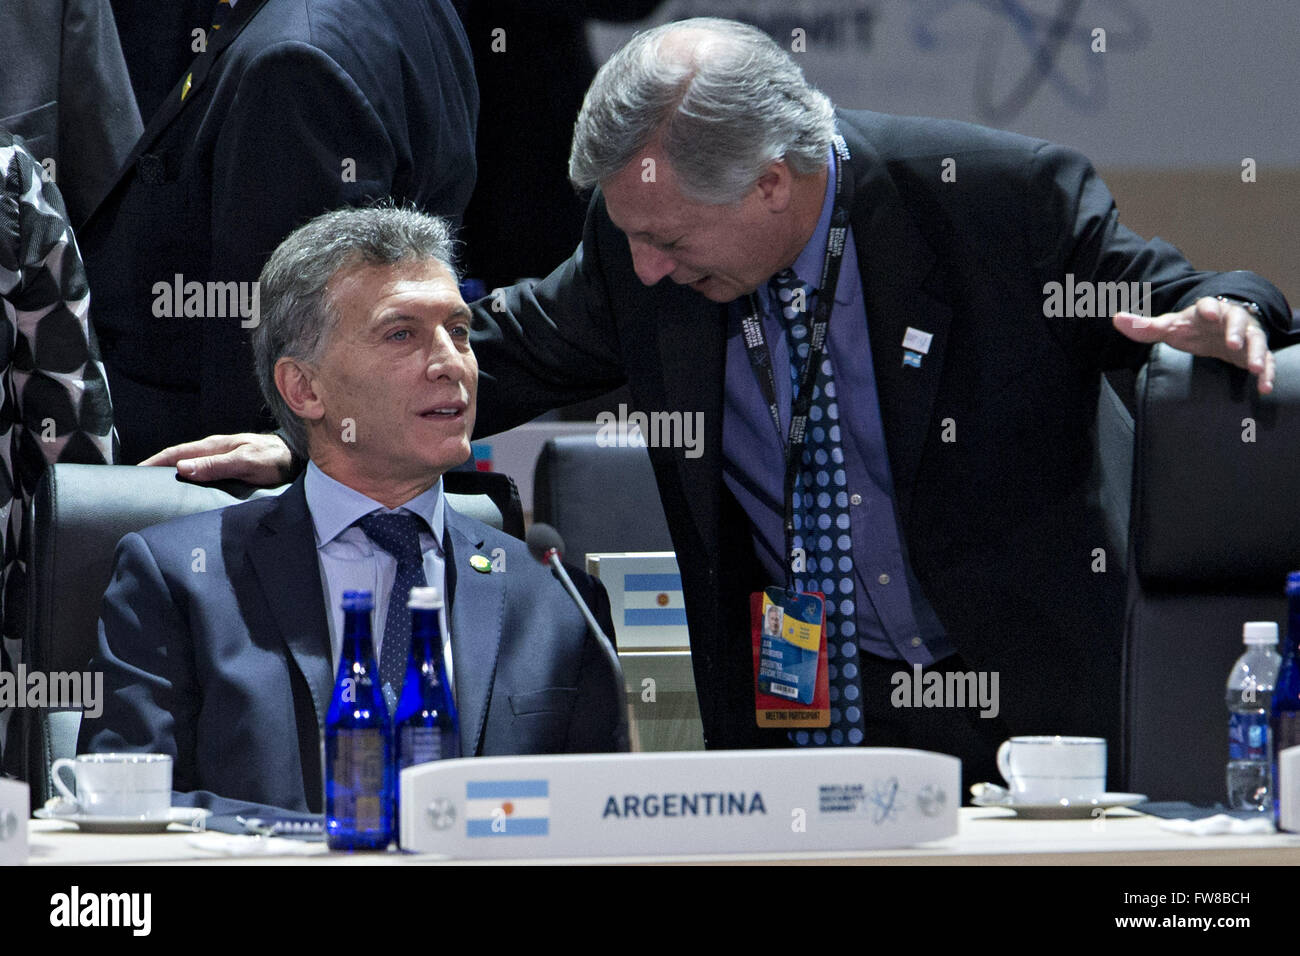 April 1, 2016 - Washington, District of Columbia, United States of America - Mauricio Macri, Argentina's president, left, waits to begin an opening plenary entitled ''National Actions to Enhance Nuclear Security'' at the Nuclear Security Summit in Washington, DC, U.S., on Friday, April 1, 2016. After a spate of terrorist attacks from Europe to Africa, U.S. President Barack Obama is rallying international support during the summit for an effort to keep Islamic State and similar groups from obtaining nuclear material and other weapons of mass destruction. Credit: Andrew Harrer/Pool via CNP Stock Photo